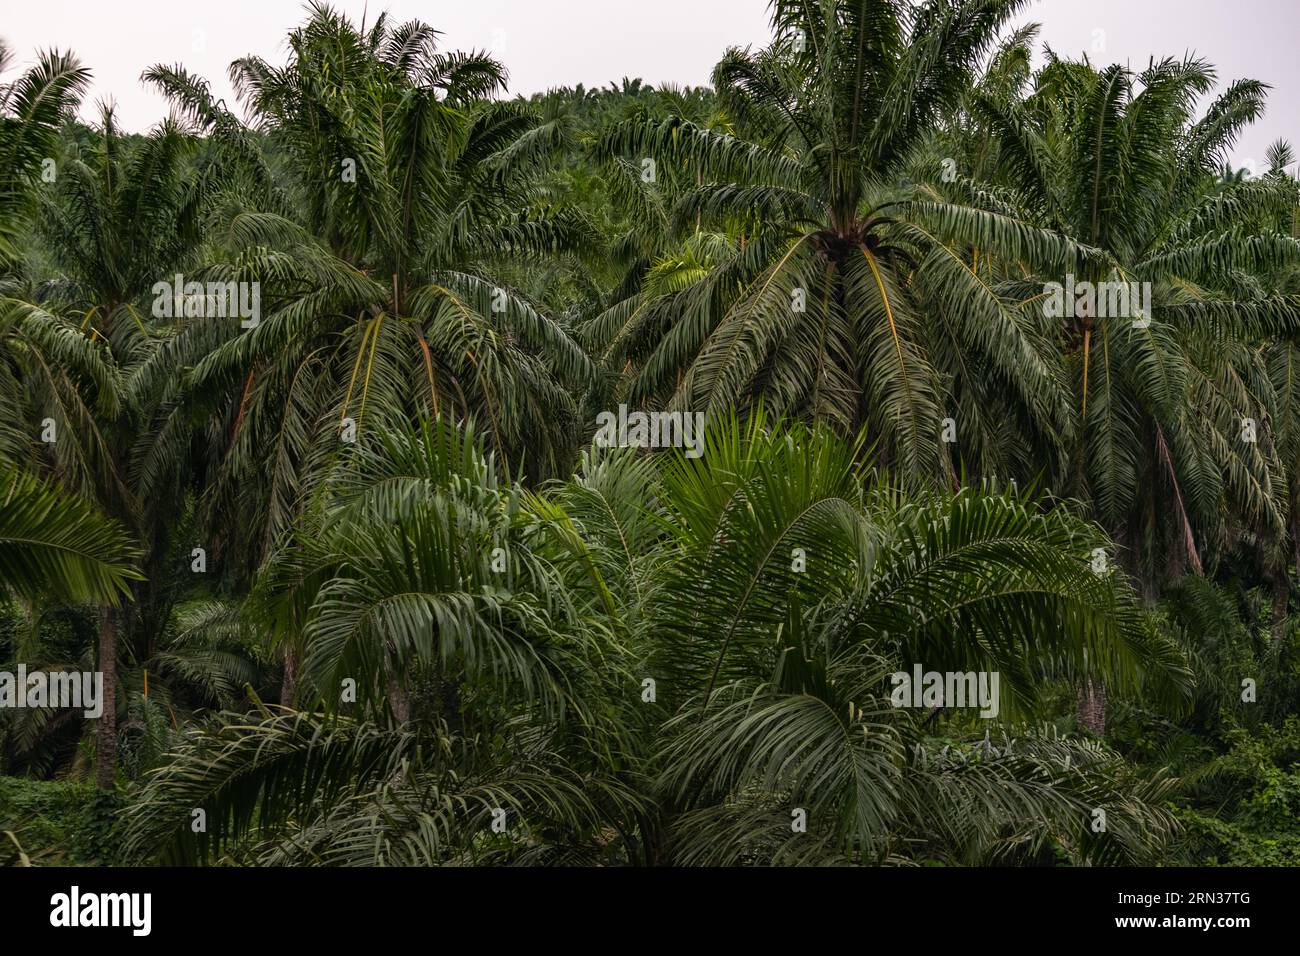 Amazing view of an oil palm plantation. Very meaningful image Stock Photo